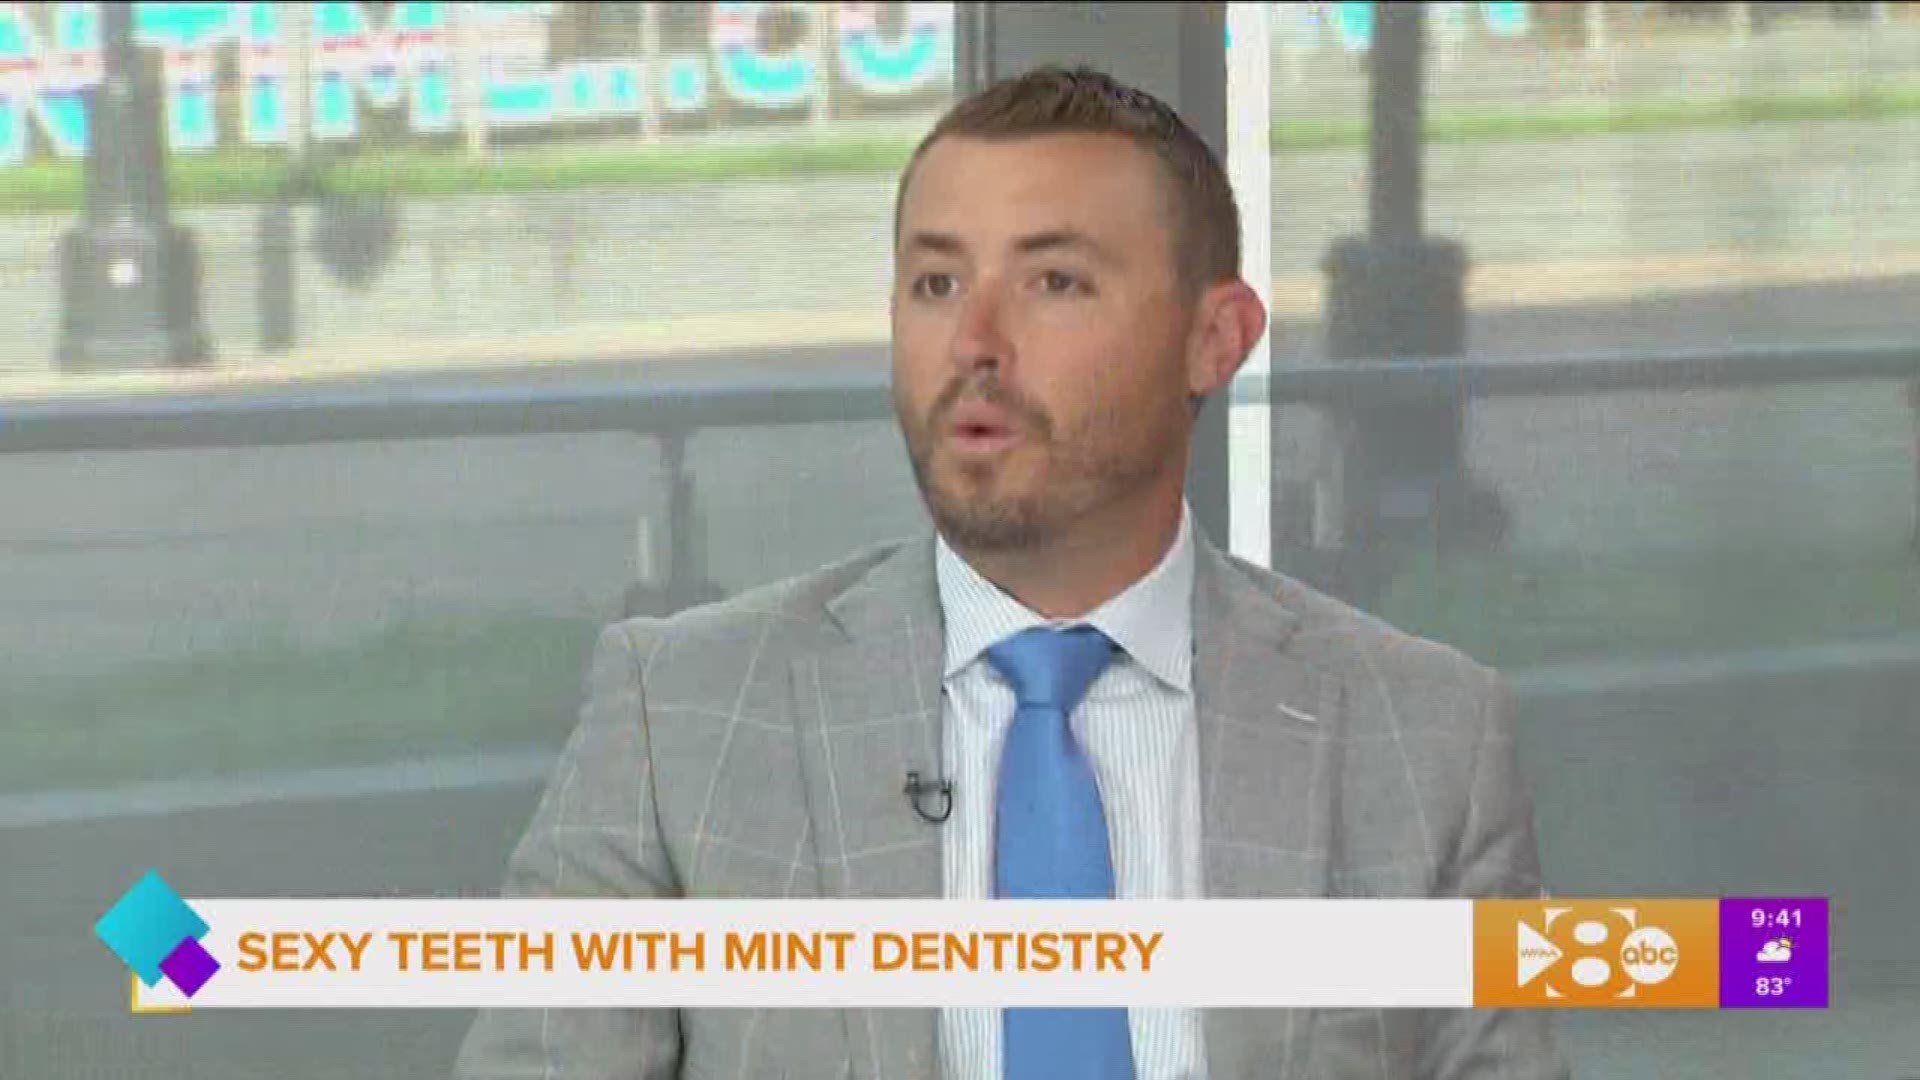 Go to mintdentistry.com of call 214.821.MINT for more information